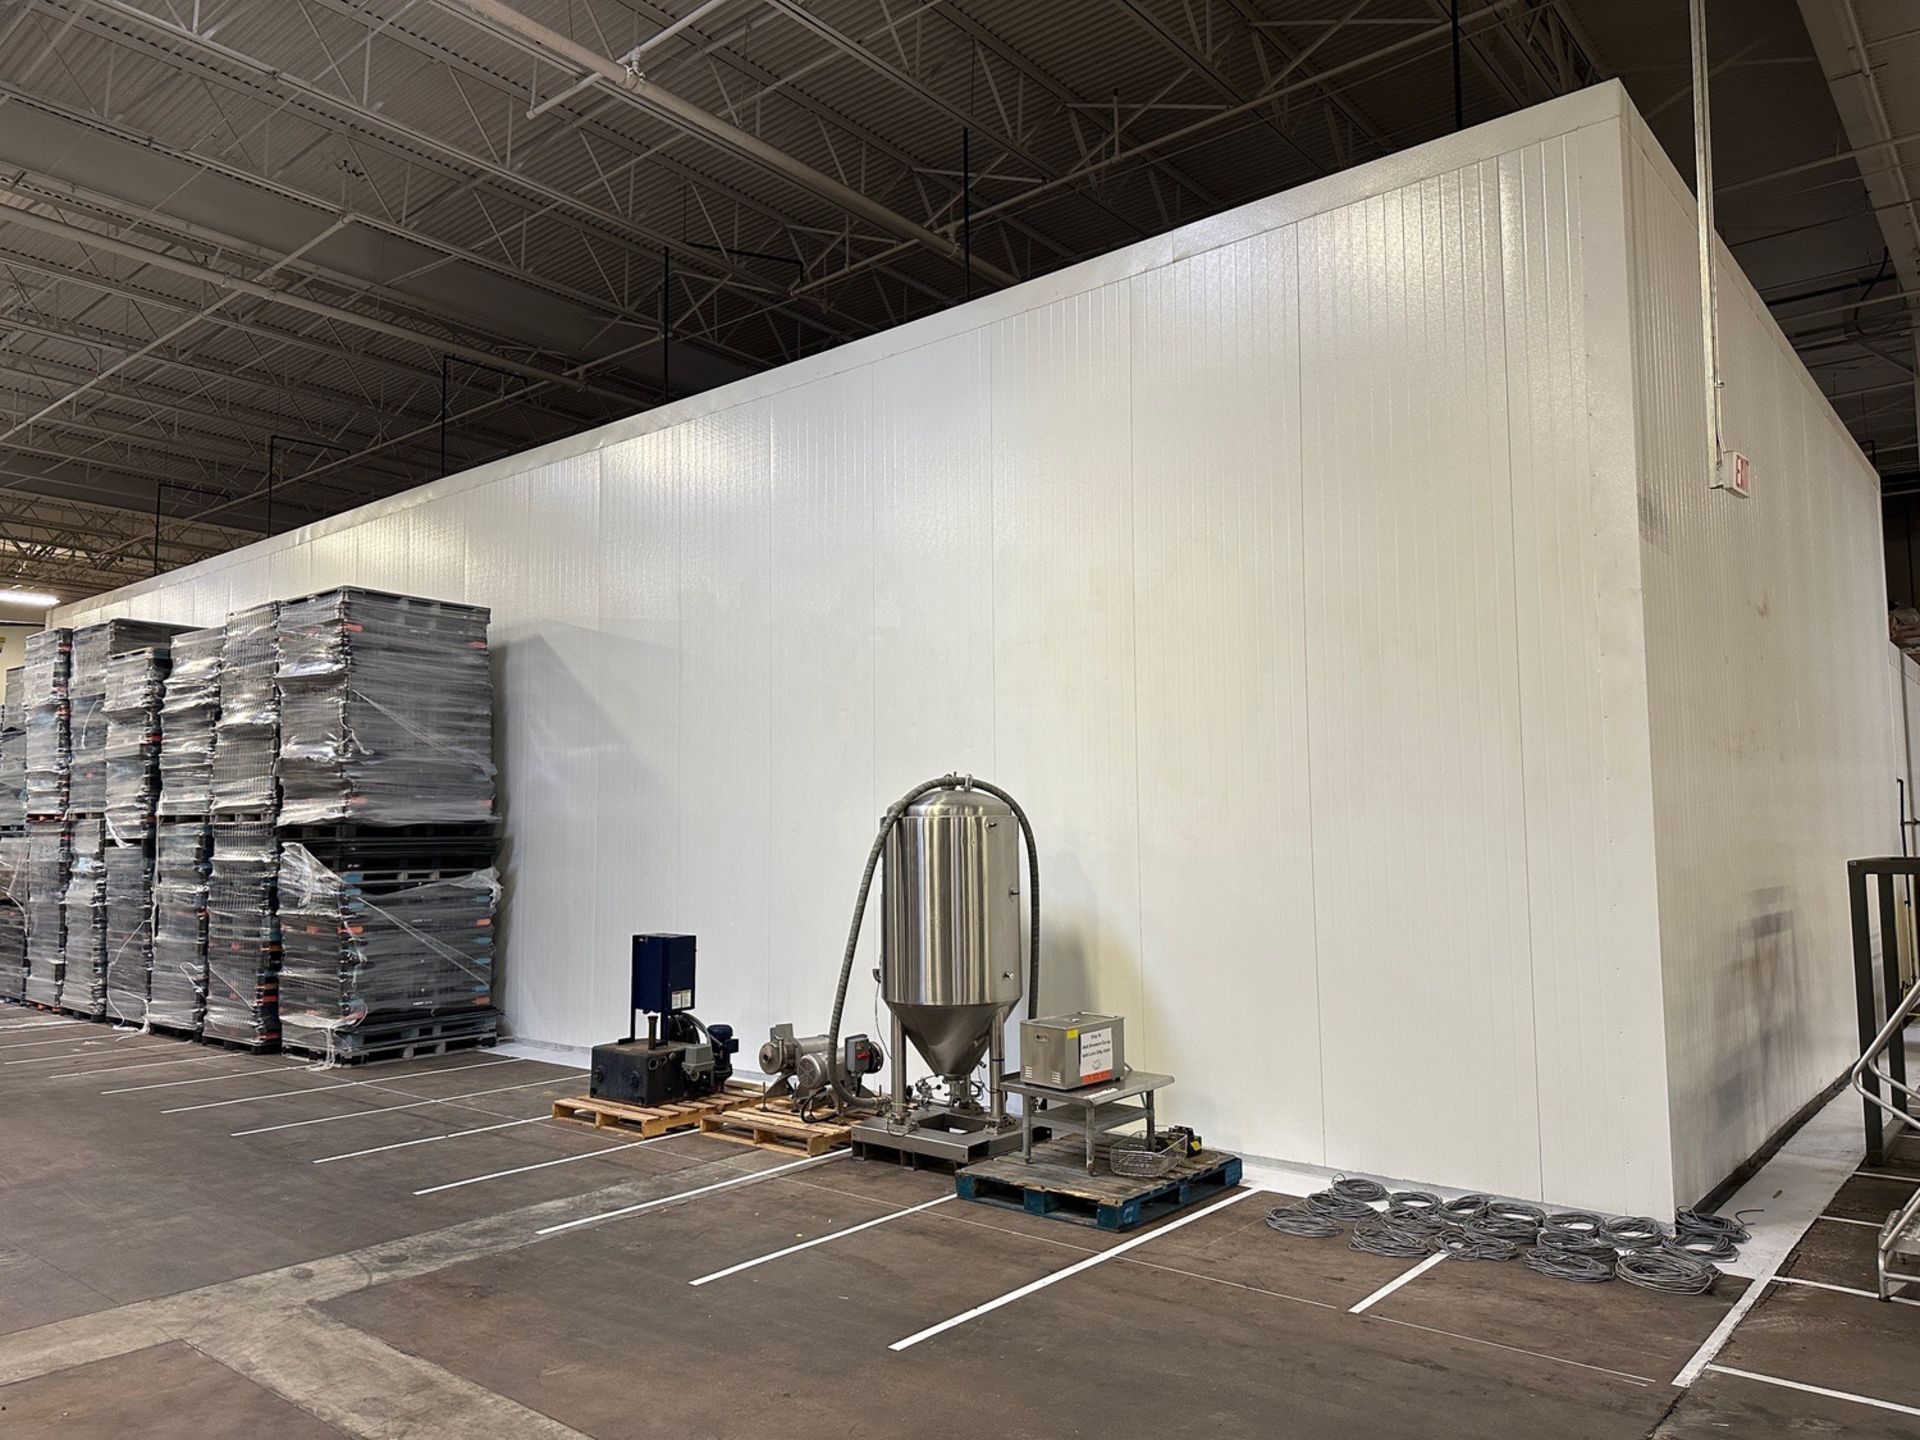 Cold Box - (3) Cooling Units - Shared Wall - (Approx. 32' x 77' x 18' - 8' x 10' Drive In Door - Man - Image 2 of 14